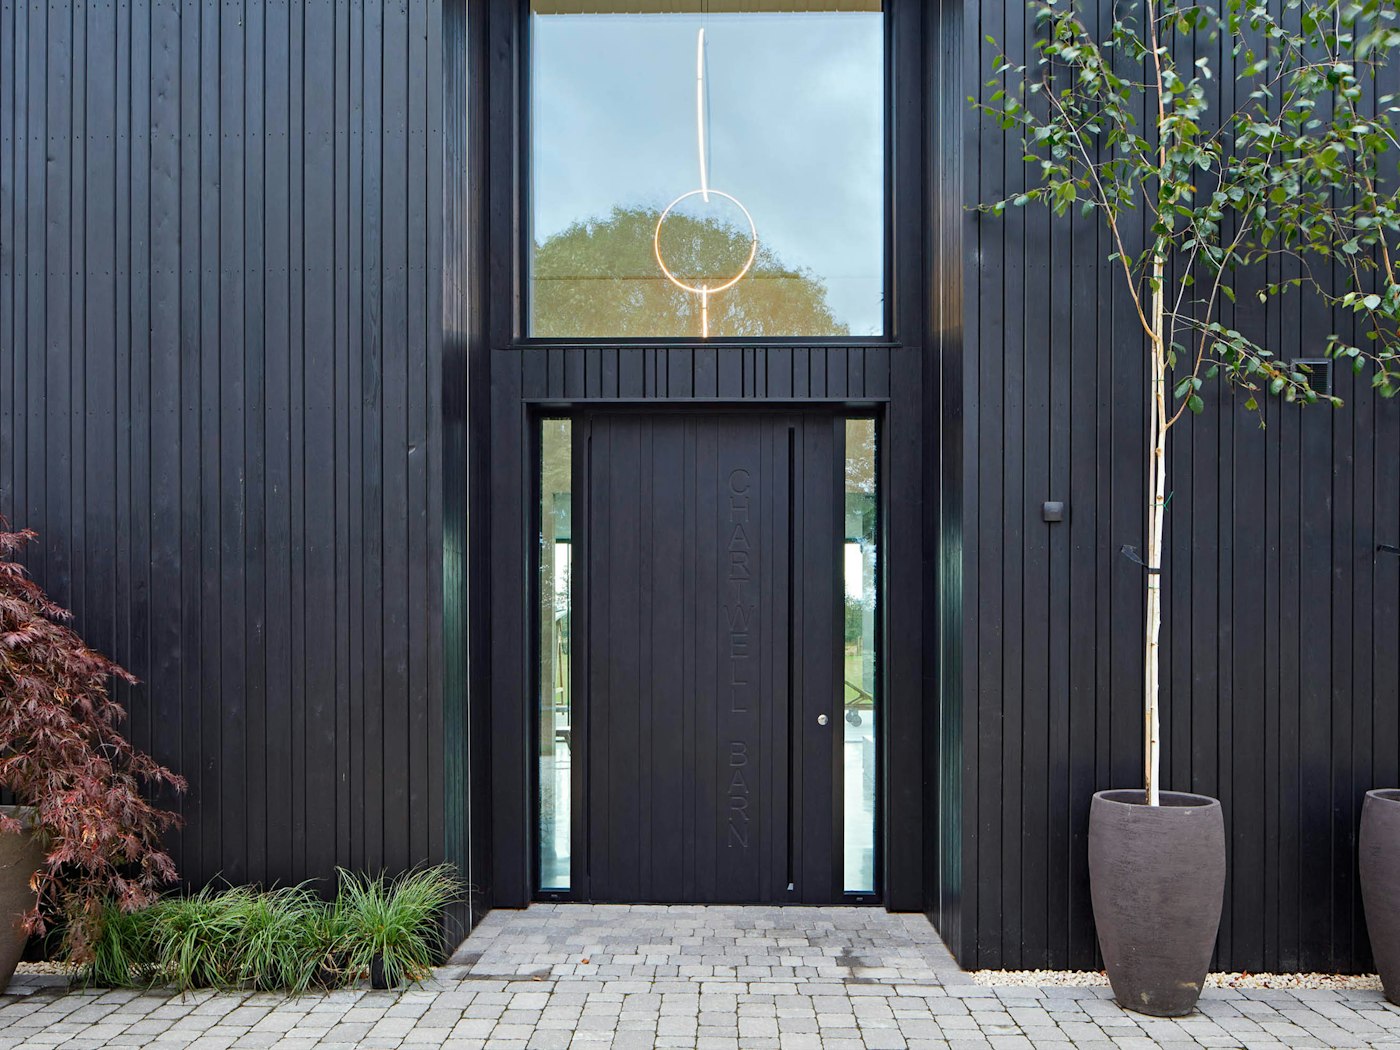 Matching an ebony-oiled wood front door to shou sugi ban cladding is increasingly popular